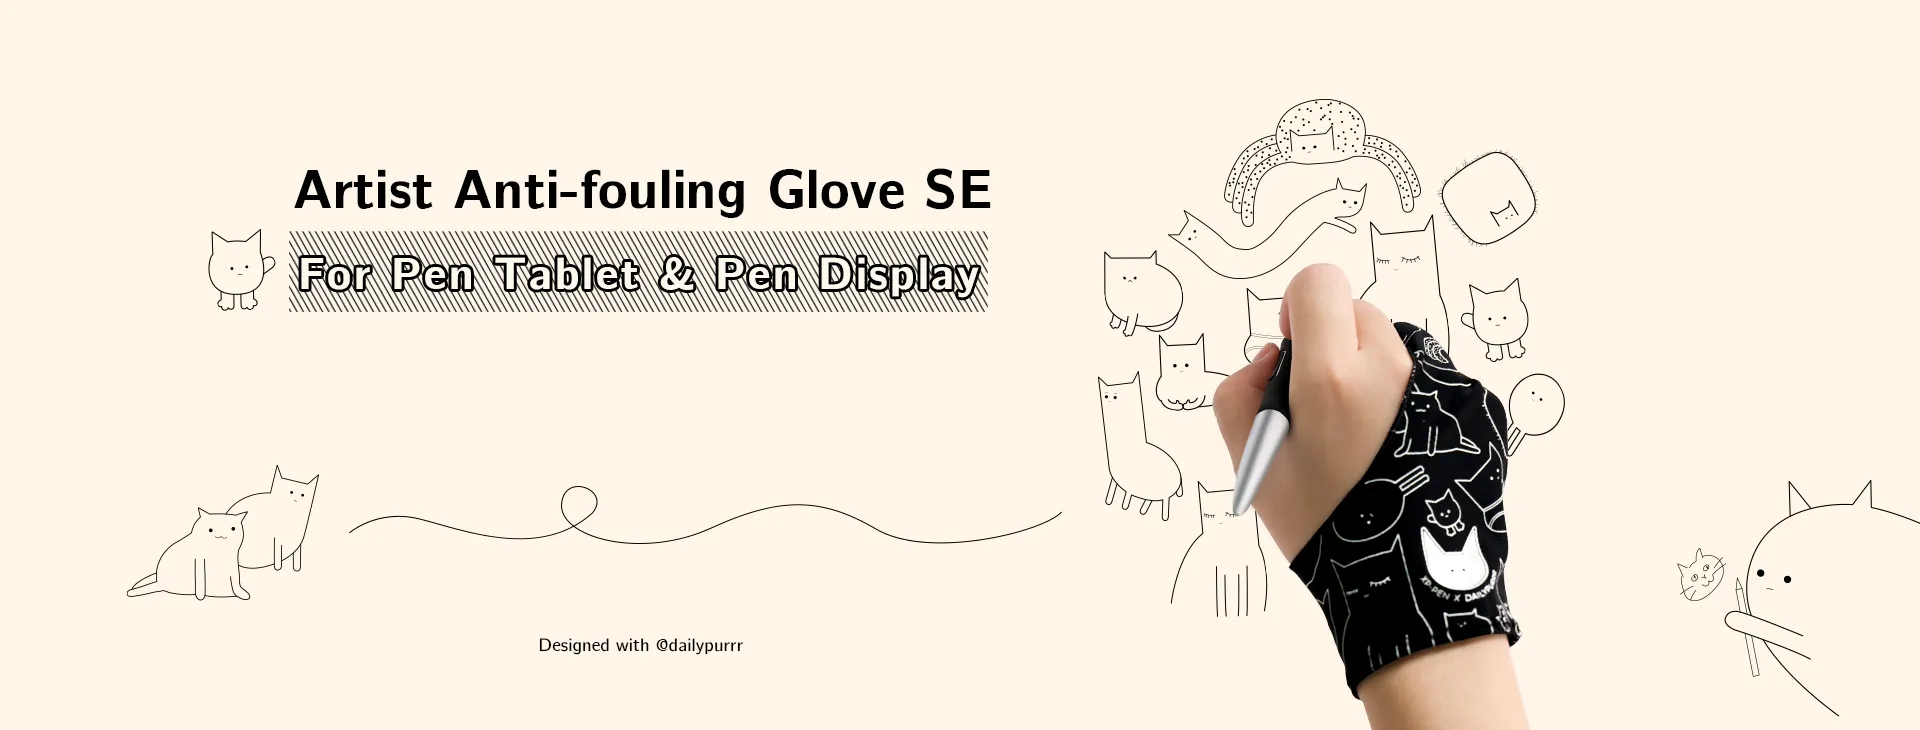 Anti Fouling Artist Drawing Fingerless Gloves For Typing For Graphics,  Tablet, And More Black, 2 Fein, Free Size From Donet, $1.02